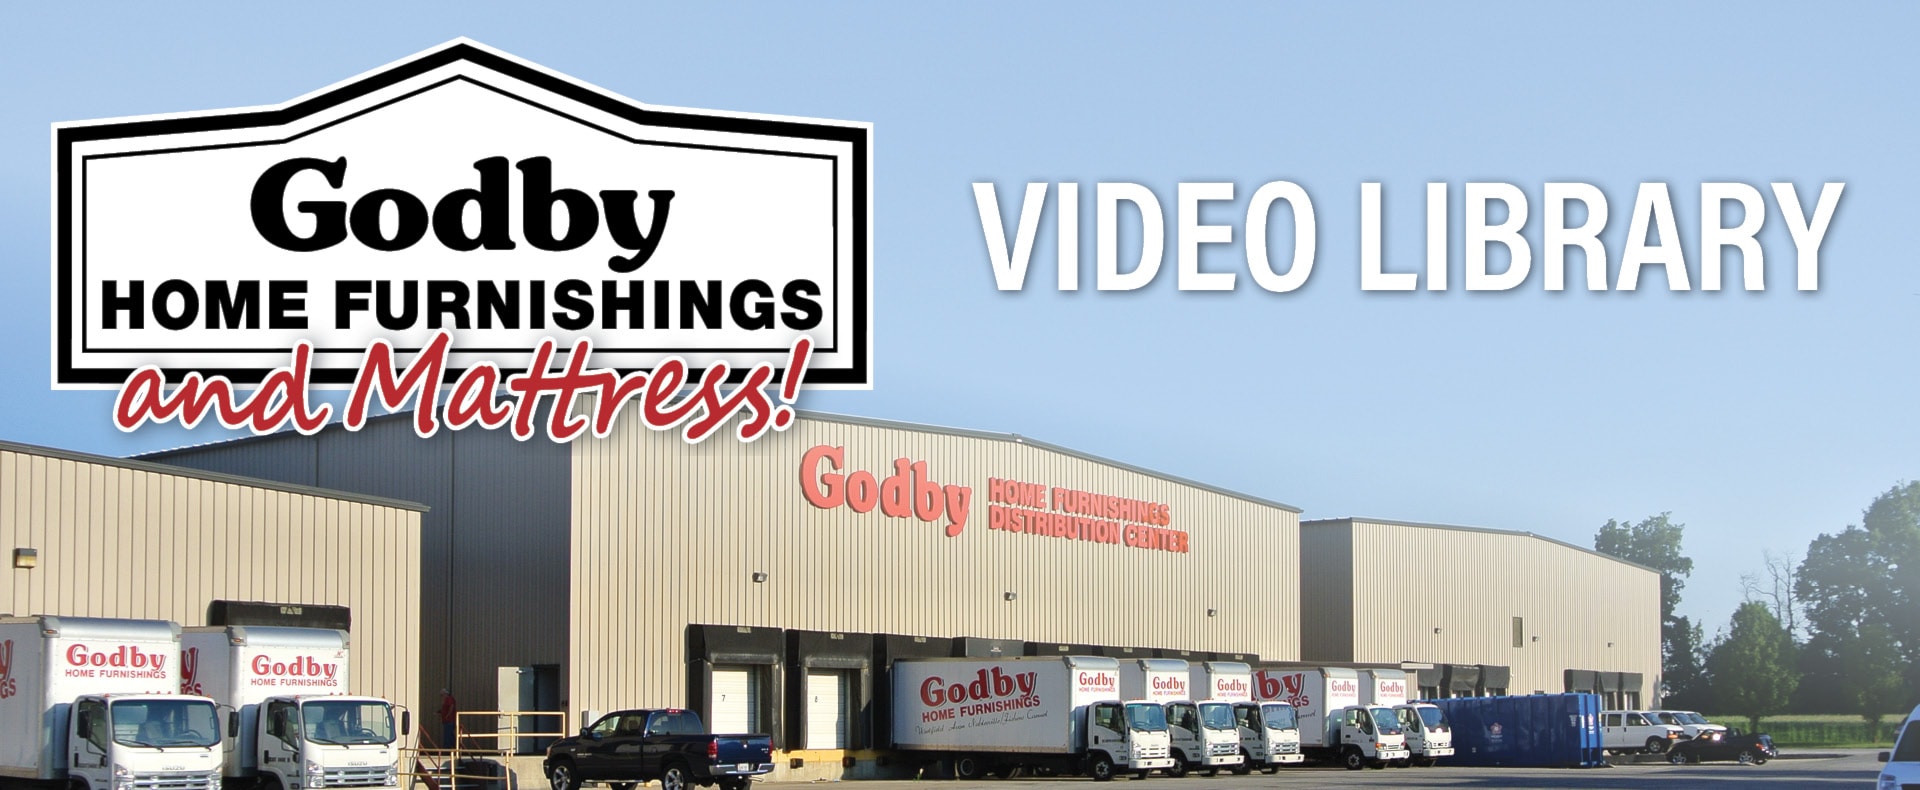 Godby Home Furnishings Video Library